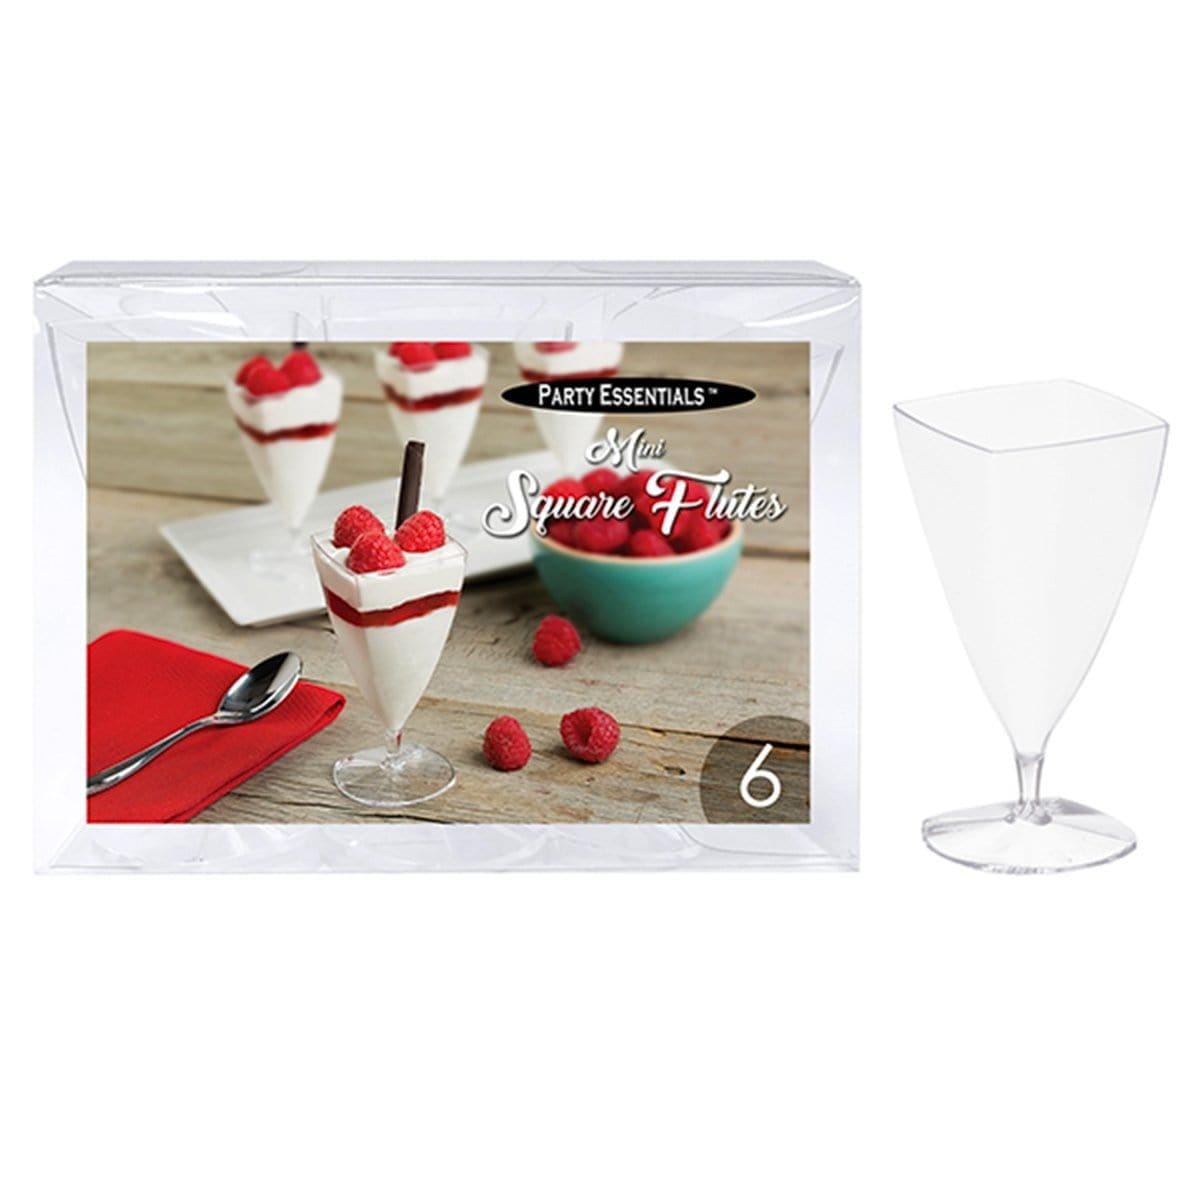 Buy Plasticware Mini Square Flute 3 Oz., 6 Count sold at Party Expert